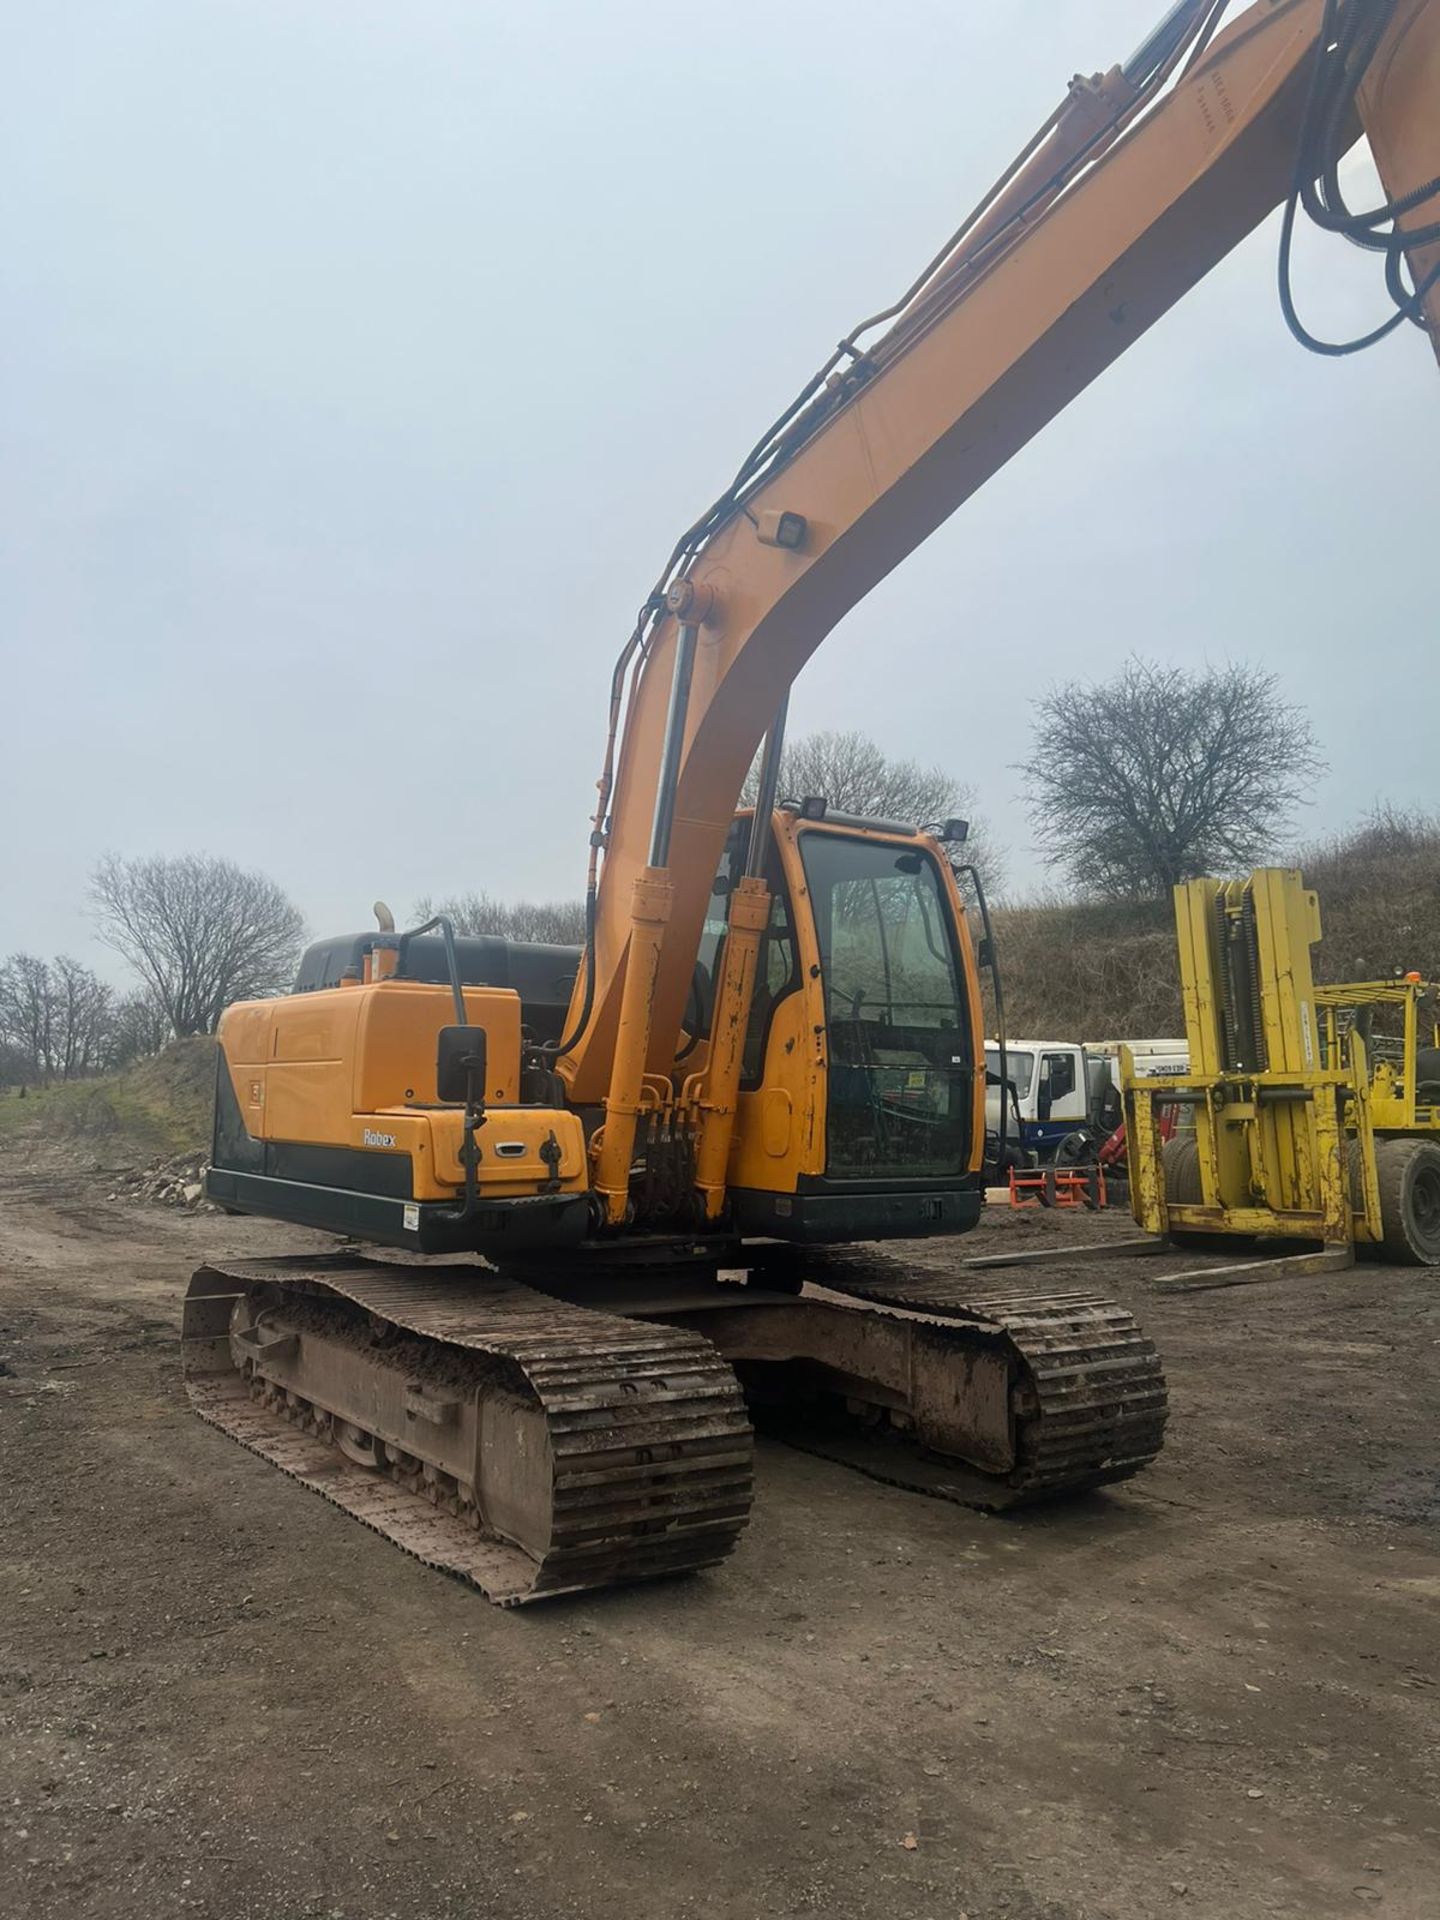 HYUNDAI ROBEX 140LC-9A 14 TON EXCAVATOR, RUNS WORKS AND DIGS, QIUCK HITCH, YEAR 2015 *PLUS VAT* - Image 4 of 12